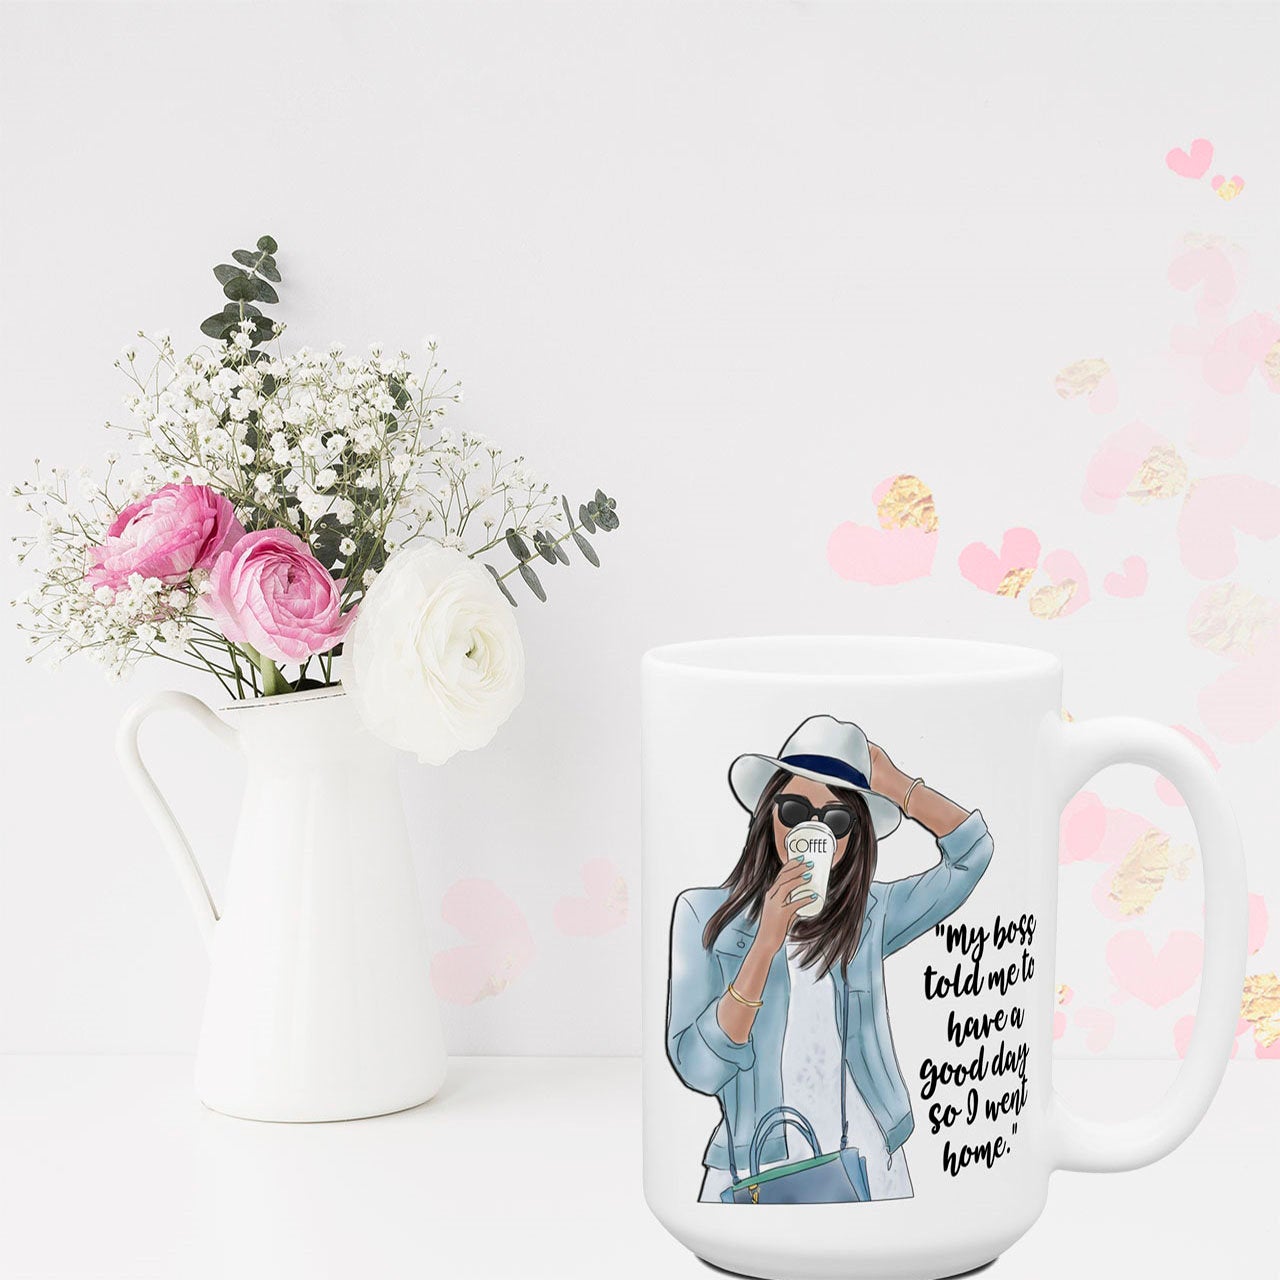 My Boss Told Me To Have a Good Day Funny Coffee Mug | Office Humor Coworker Gift for Her Ideas | Work Friend